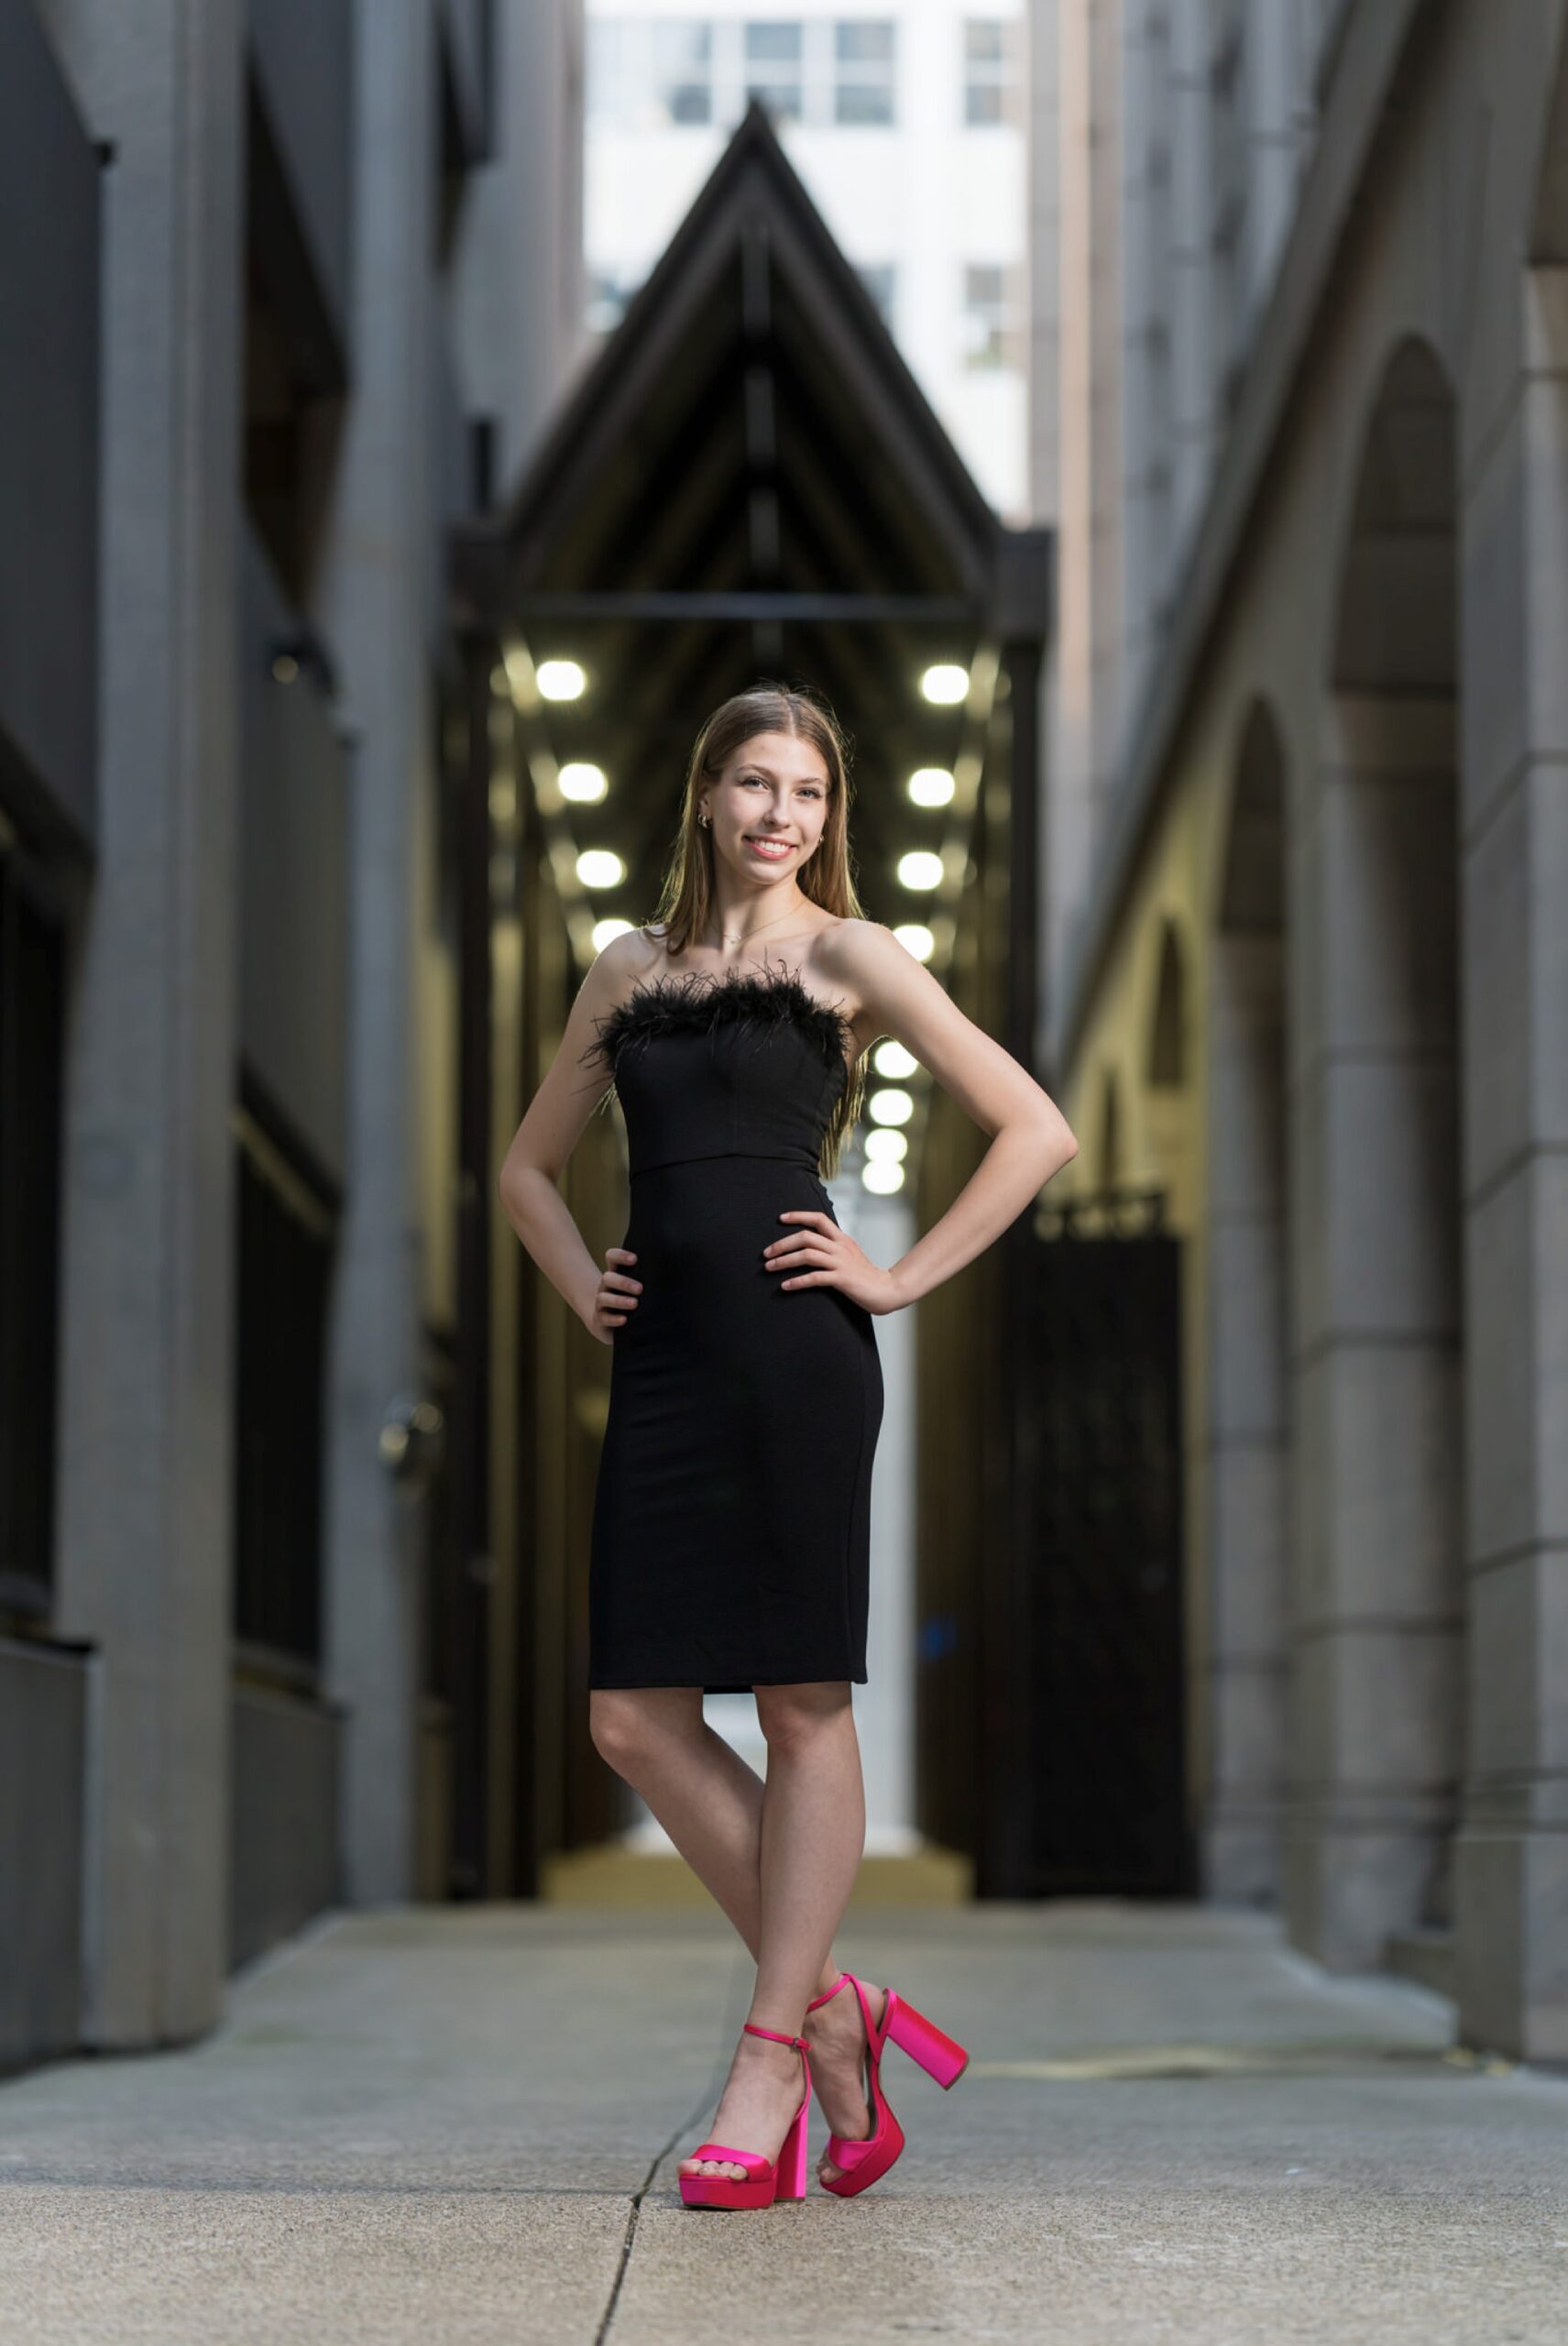 A woman wearing a black dress and pink heels poses in an alleyway for her Detroit senior pictures.  